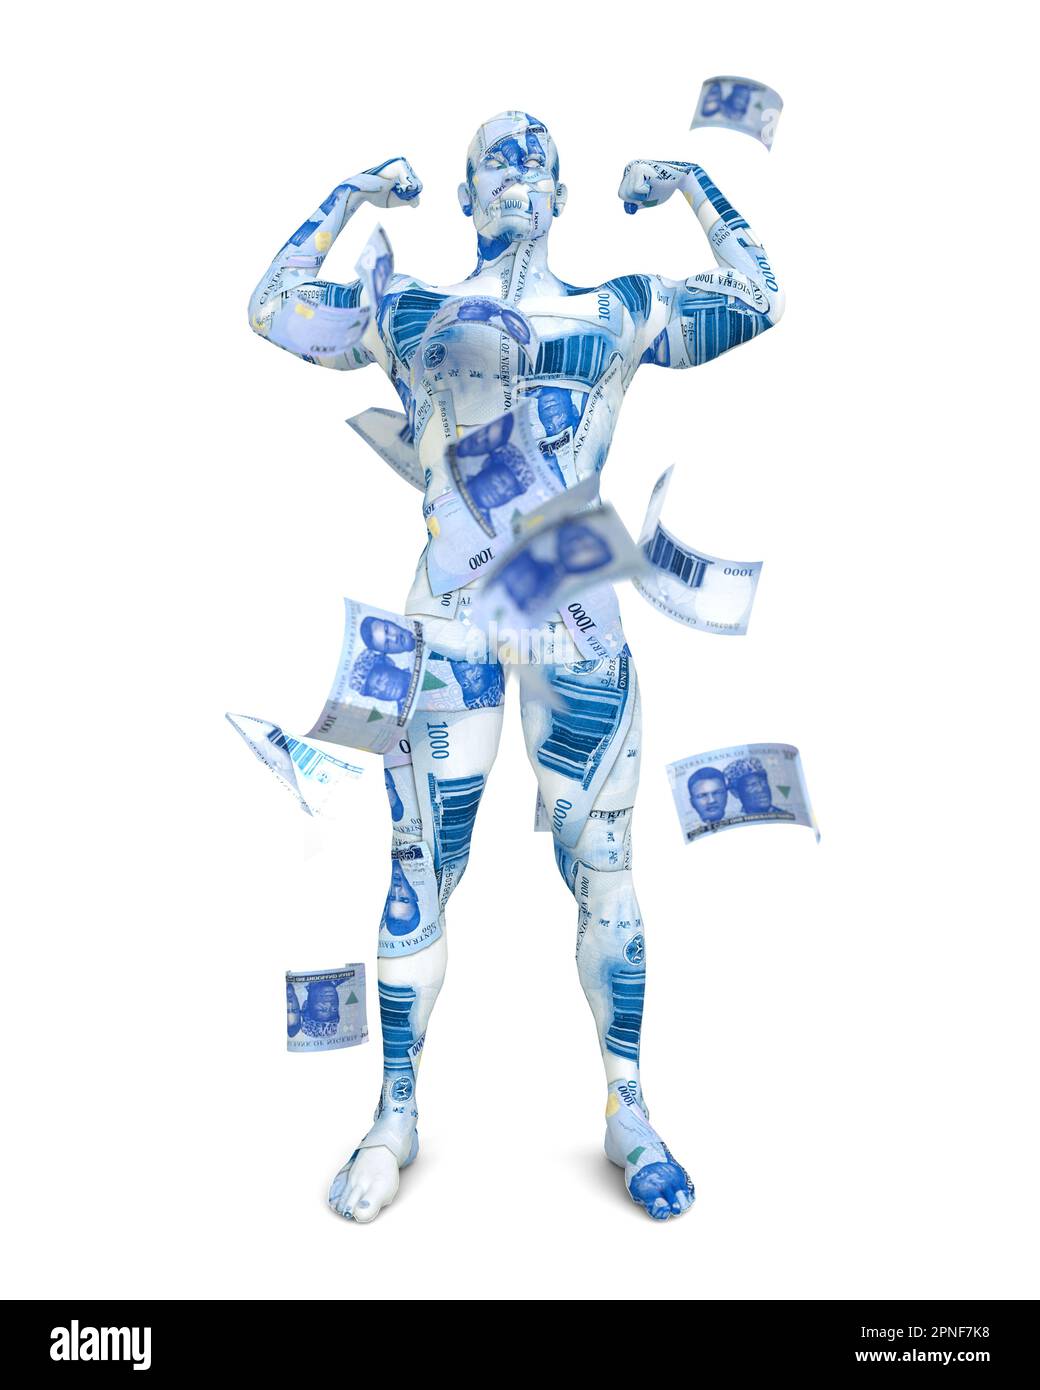 3D rendering of human figure made up of Nigerian naira notes Stock Photo